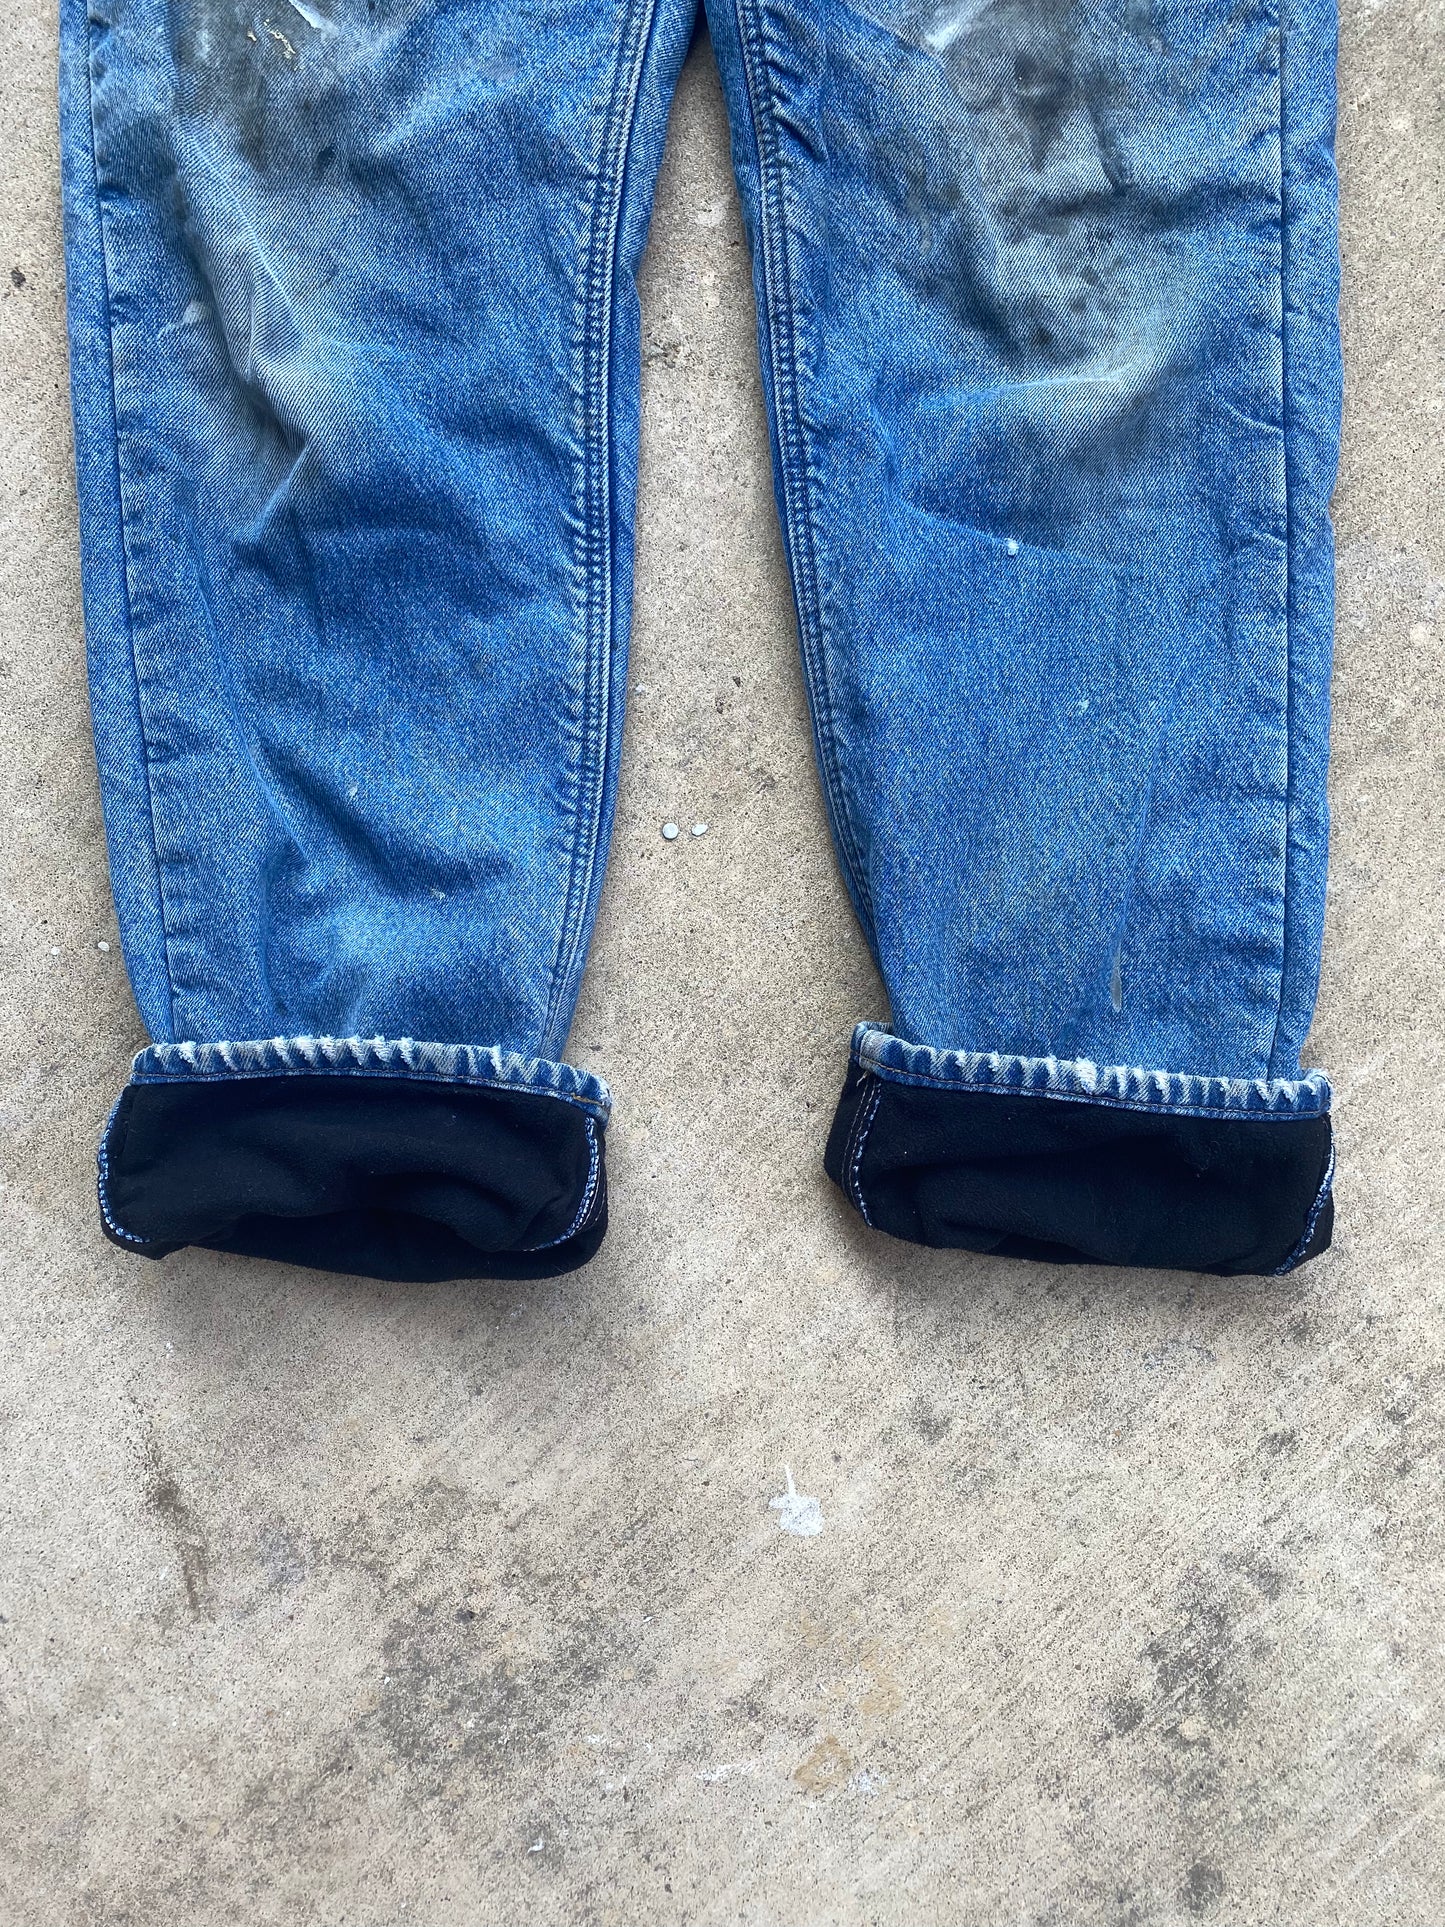 Blanket Lined Carhartt Jeans - Brimm Archive Wardrobe Research